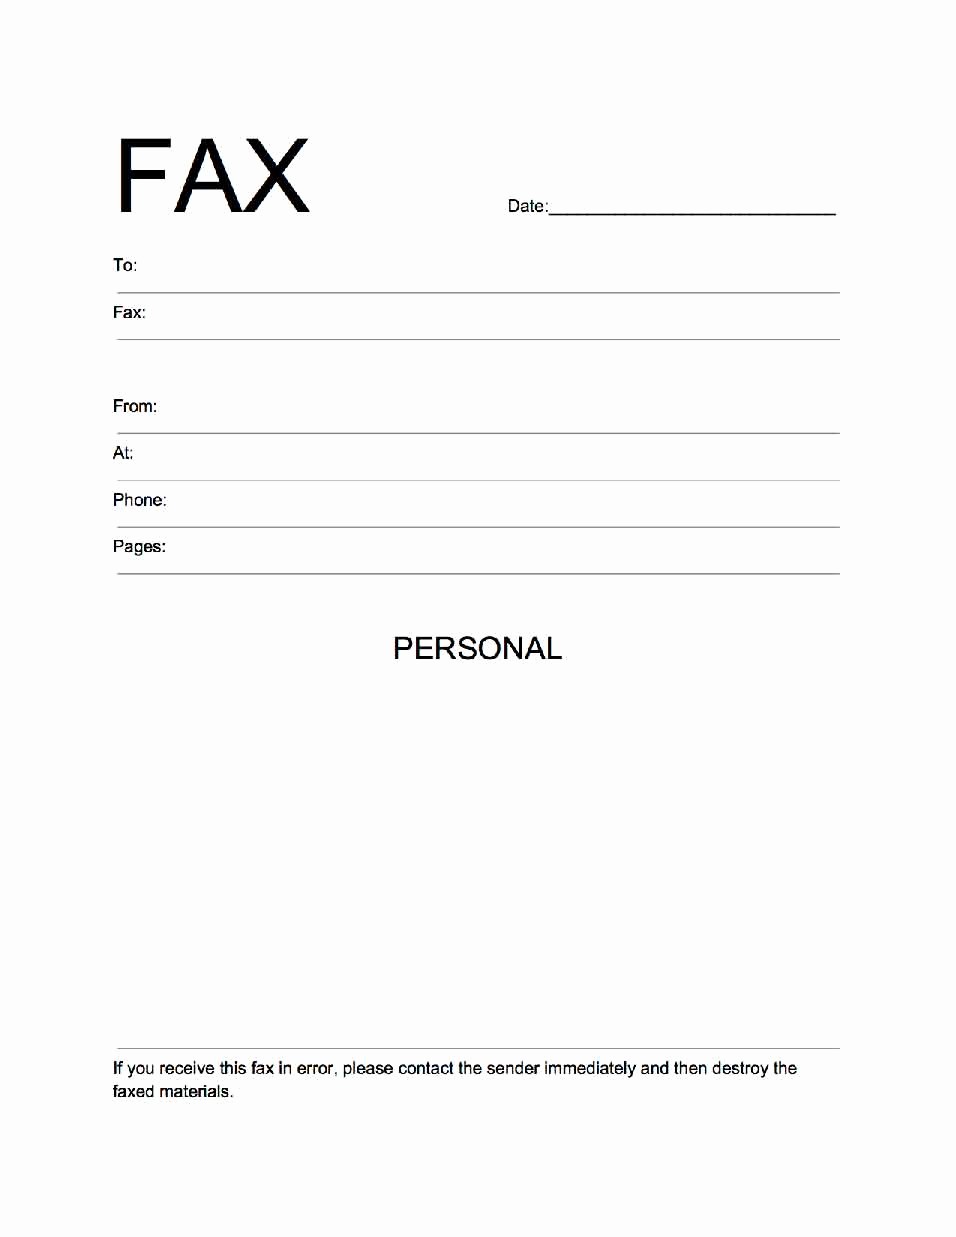 How to Fax Cover Sheet Fresh Free Fax Cover Sheet Template Download